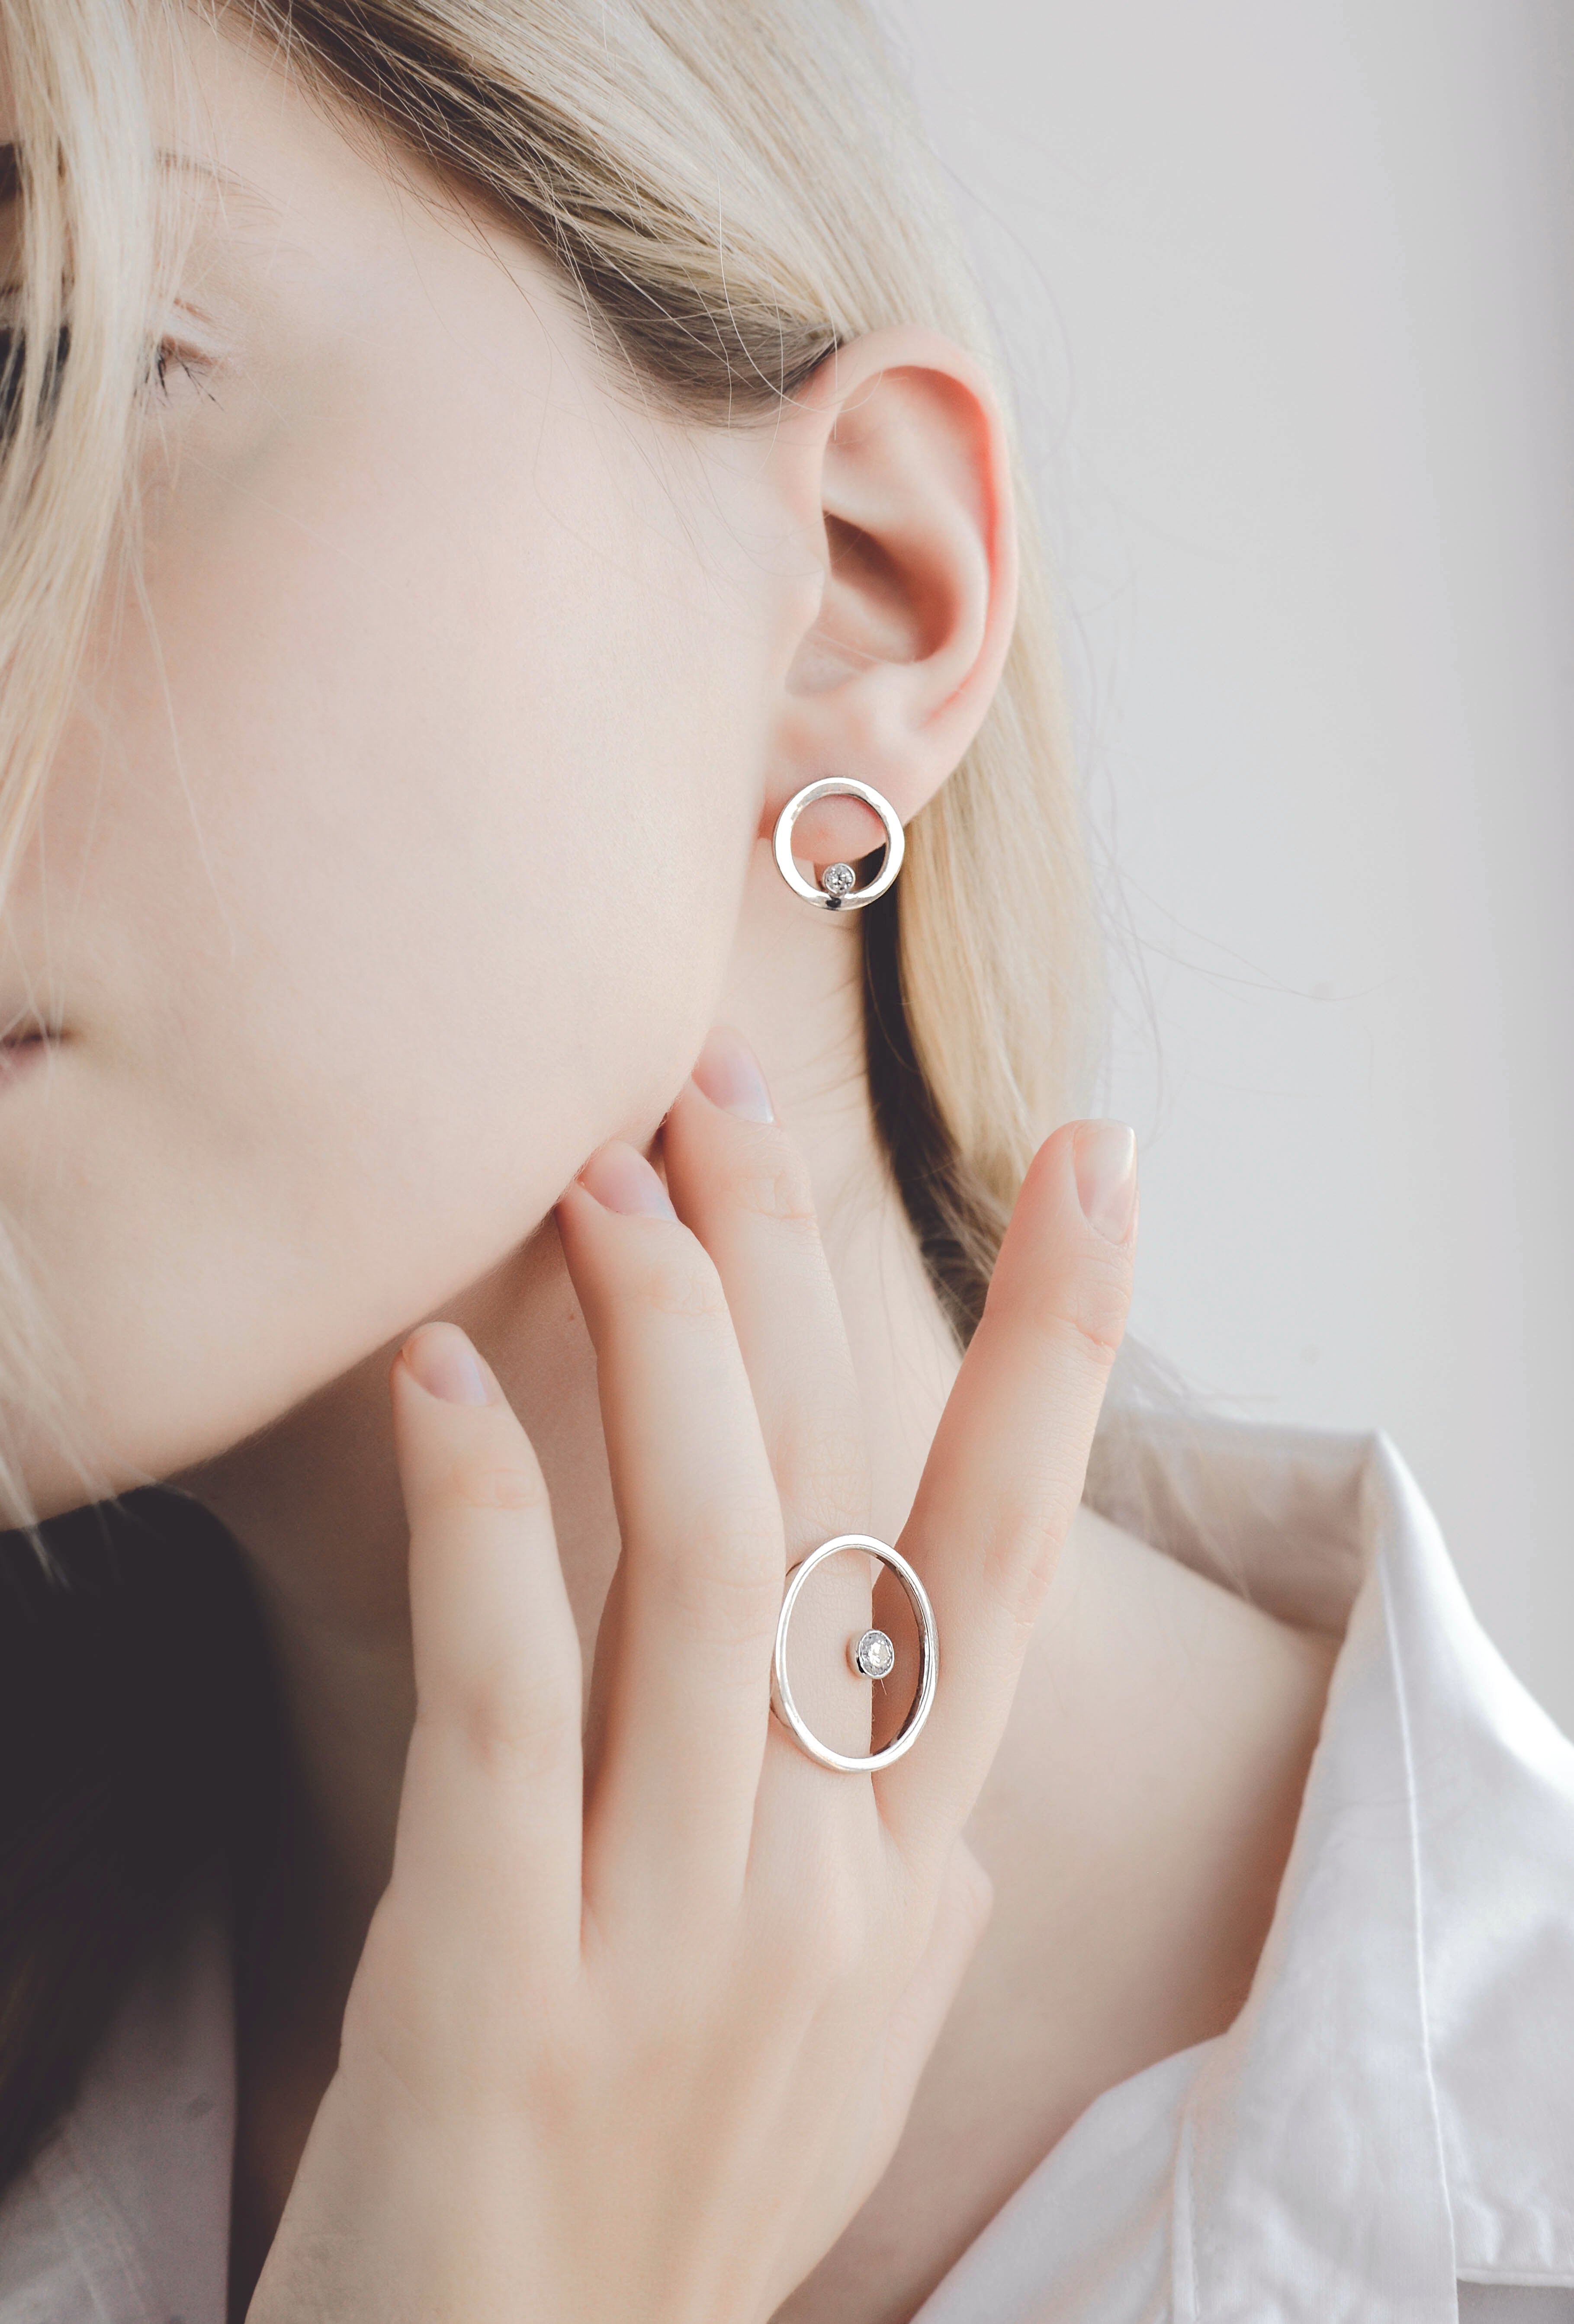 Model wearing set: lever back earrings in 14K white gold decorated with diamond-cut zirconium and 14K white gold ring decorated with zirconium.